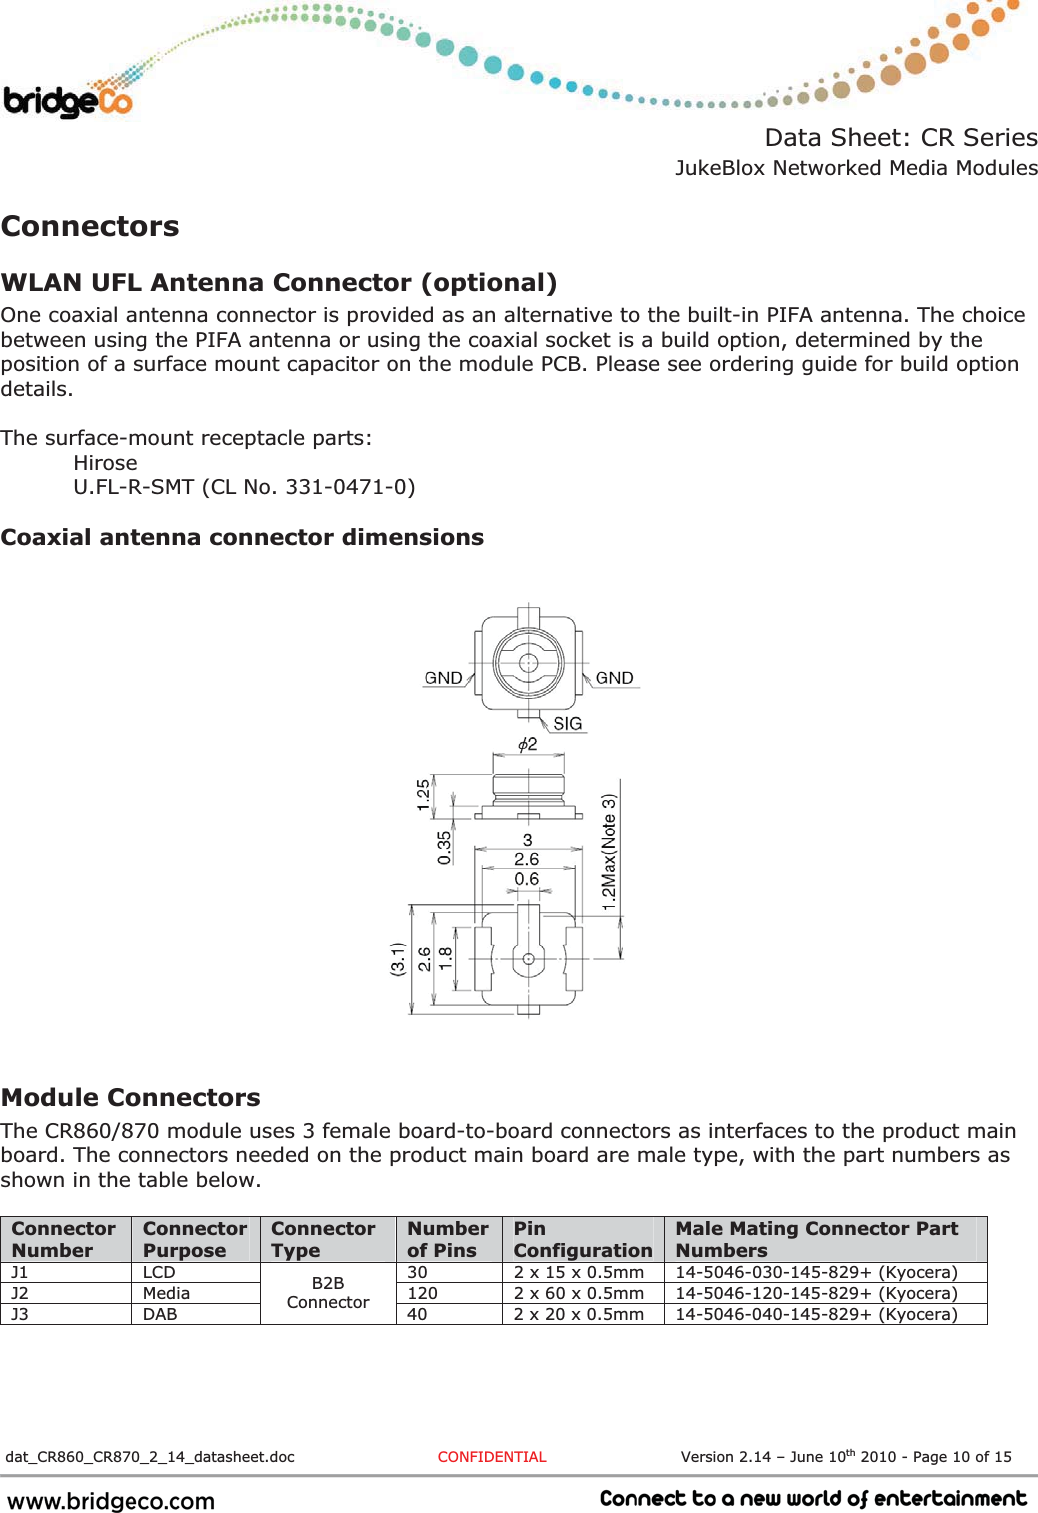 Data Sheet: CR Series JukeBlox Networked Media Modules  dat_CR860_CR870_2_14_datasheet.doc  CONFIDENTIAL                           Version 2.14 – June 10th 2010 - Page 10 of 15                             ConnectorsWLAN UFL Antenna Connector (optional) One coaxial antenna connector is provided as an alternative to the built-in PIFA antenna. The choice between using the PIFA antenna or using the coaxial socket is a build option, determined by the position of a surface mount capacitor on the module PCB. Please see ordering guide for build option details. The surface-mount receptacle parts:  Hirose   U.FL-R-SMT (CL No. 331-0471-0) Coaxial antenna connector dimensions Module Connectors The CR860/870 module uses 3 female board-to-board connectors as interfaces to the product main board. The connectors needed on the product main board are male type, with the part numbers as shown in the table below. ConnectorNumberConnectorPurposeConnectorTypeNumberof Pins PinConfigurationMale Mating Connector Part NumbersJ1  LCD  30  2 x 15 x 0.5mm  14-5046-030-145-829+ (Kyocera) J2  Media  120  2 x 60 x 0.5mm  14-5046-120-145-829+ (Kyocera) J3 DAB B2BConnector  40  2 x 20 x 0.5mm  14-5046-040-145-829+ (Kyocera) 